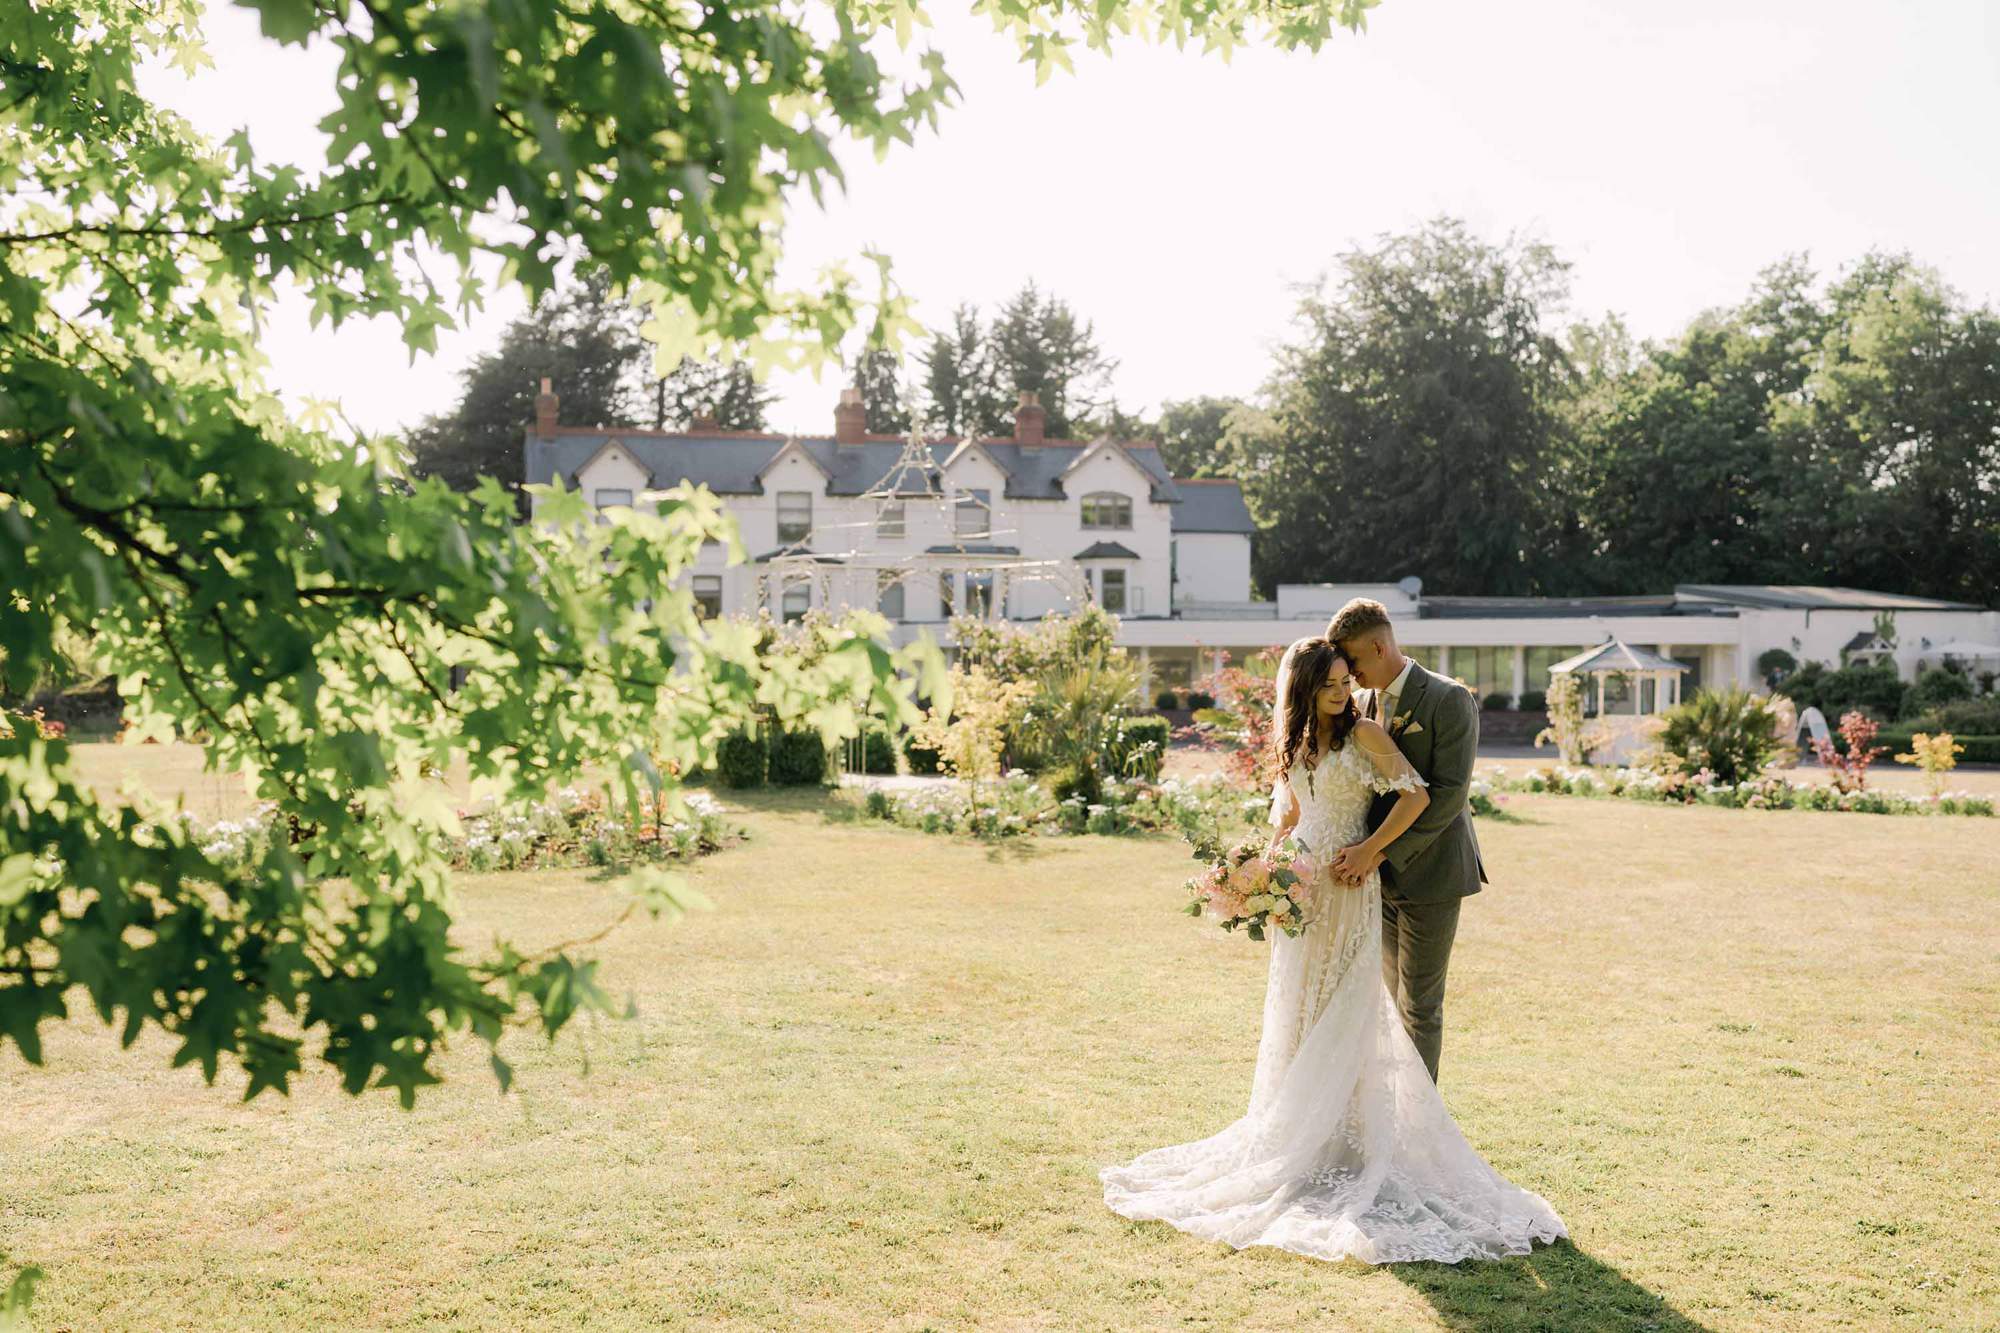 Bride and groom hug closely on their sunny wedding day at Southdowns Manor.